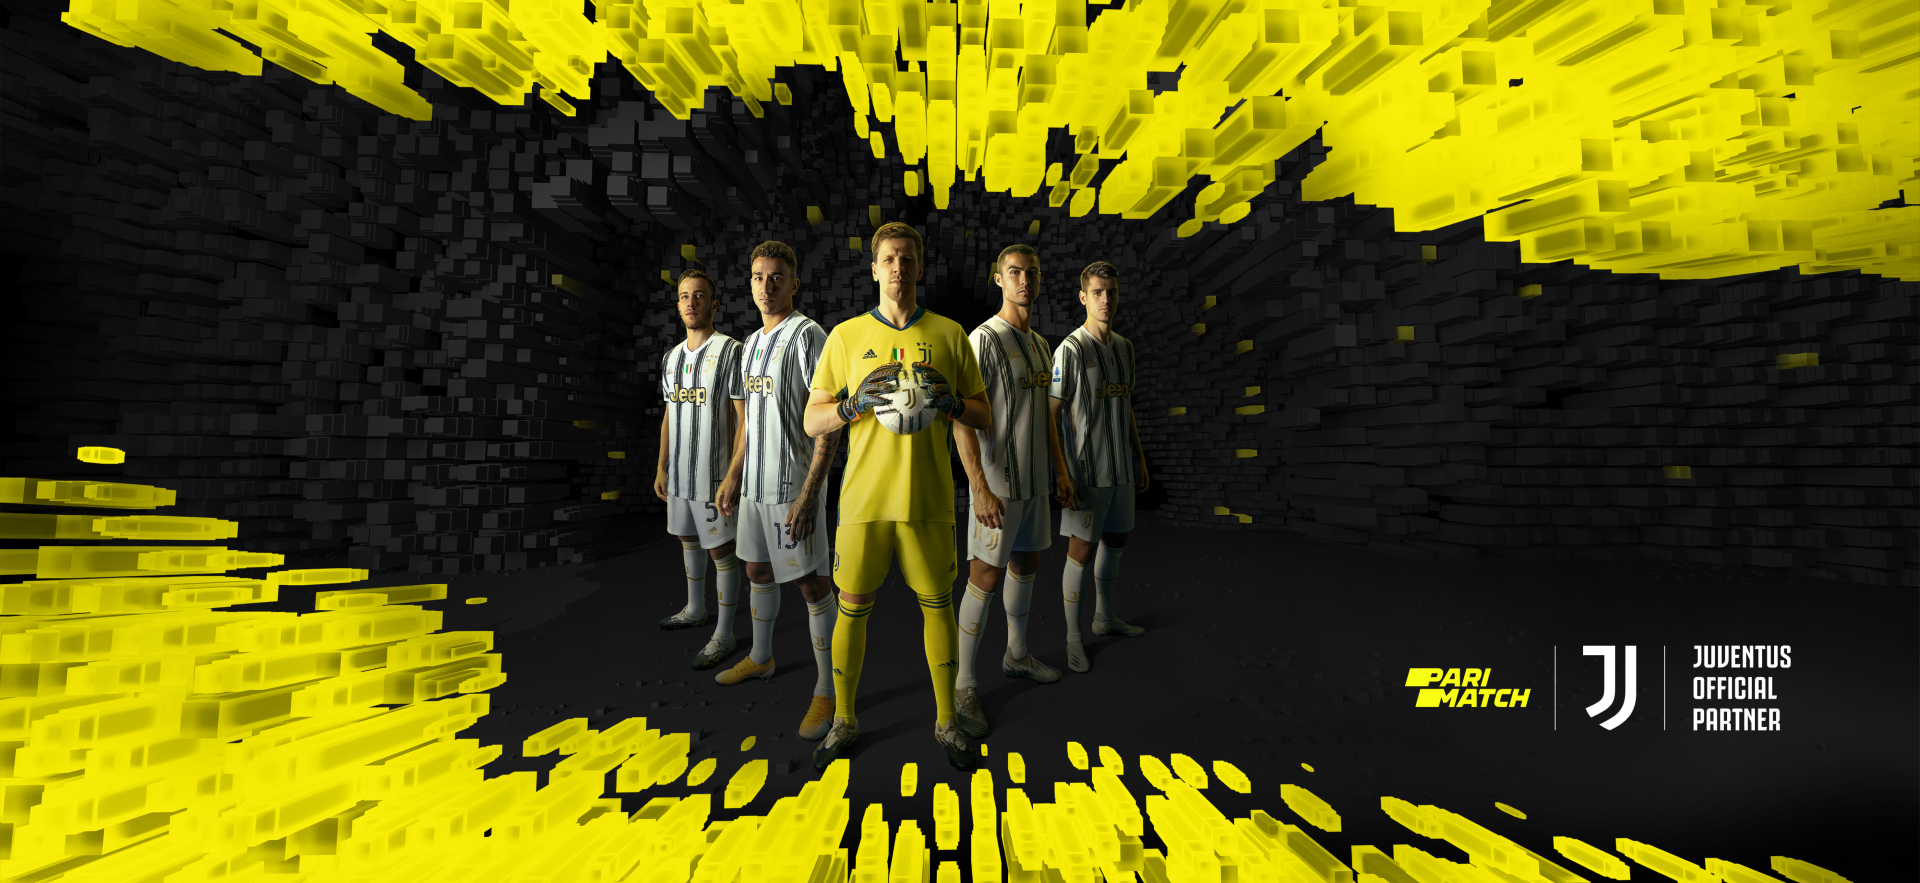 Parimatch Launches a Global Campaign with Juventus